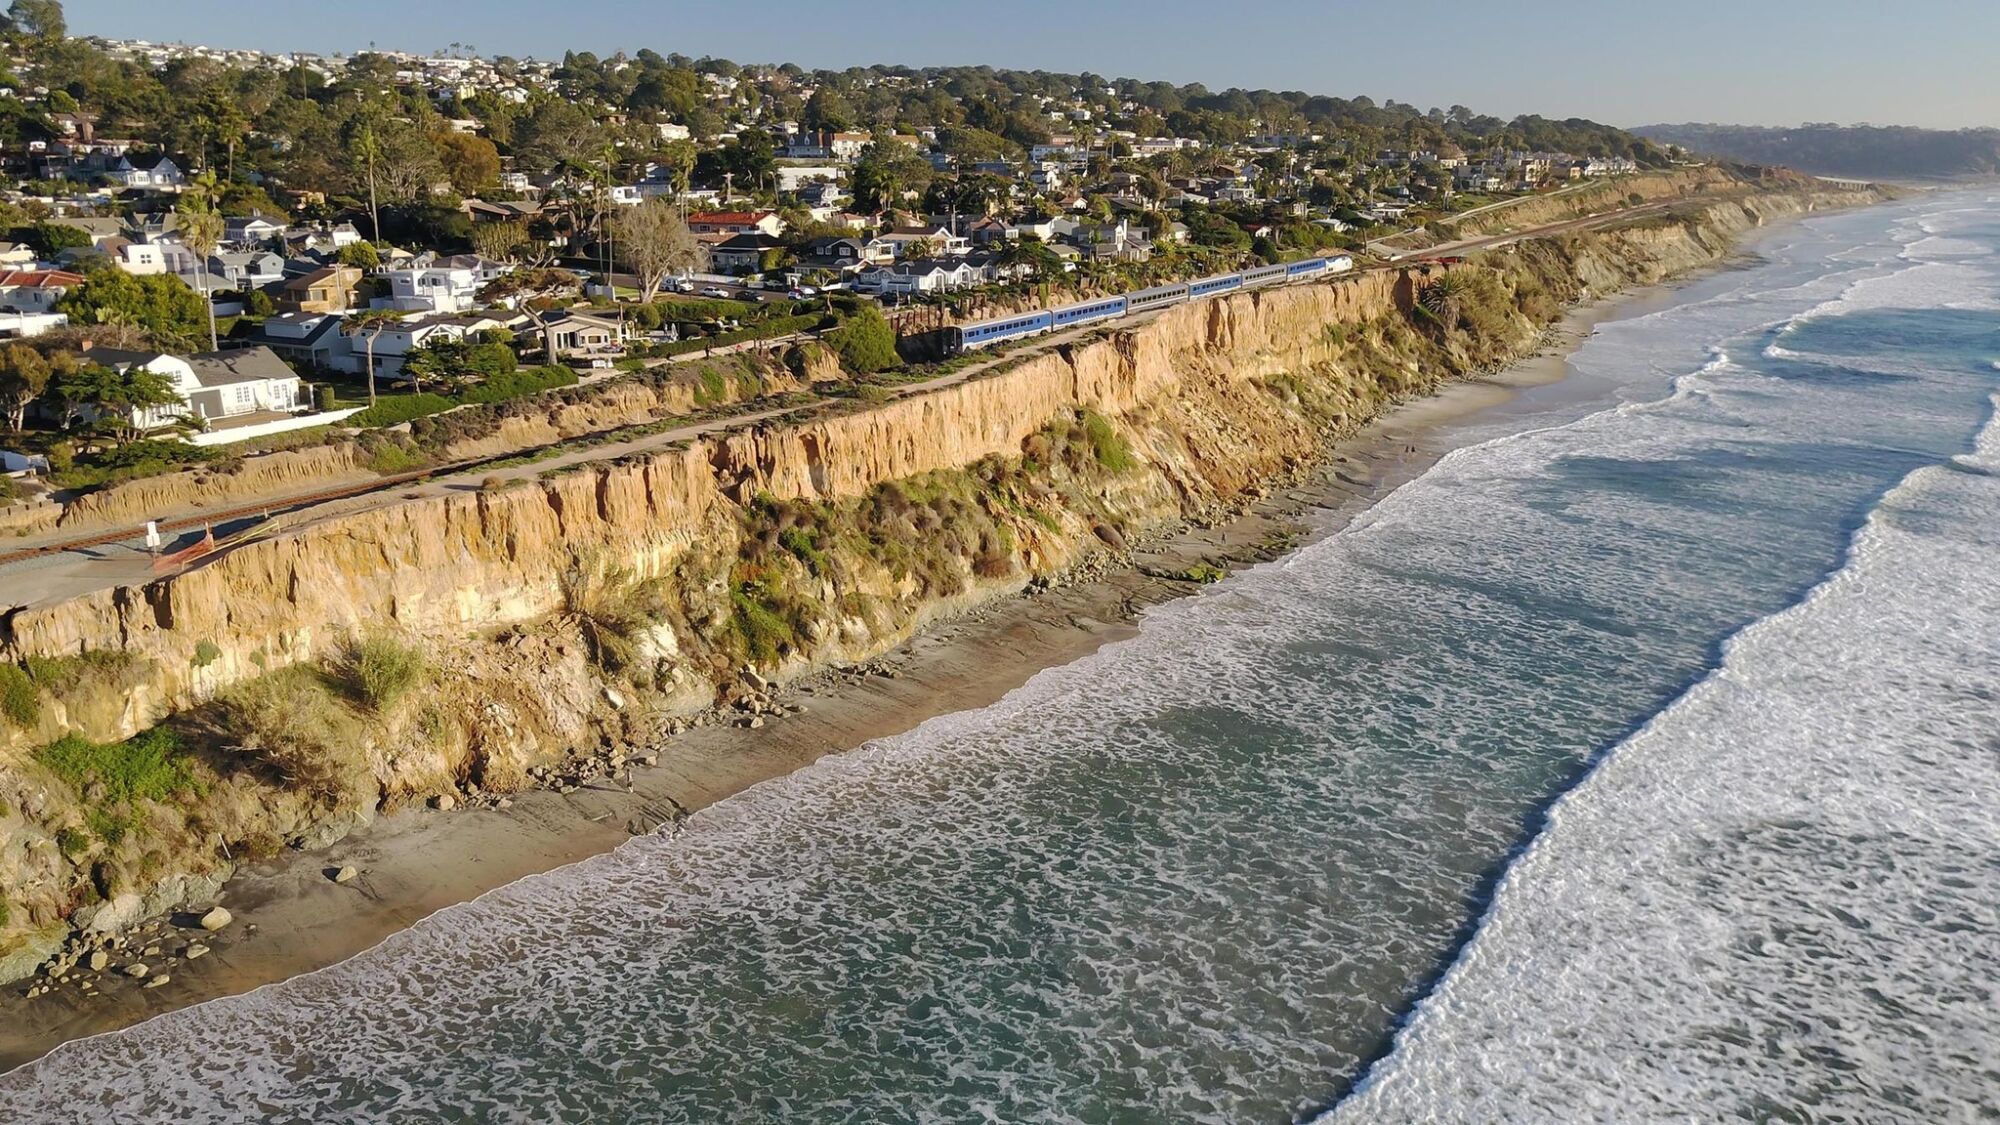 For the fourth time this year, the bluffs above the beach in Del Mar between 9th and 10th streets have sloughed off onto the beach below.